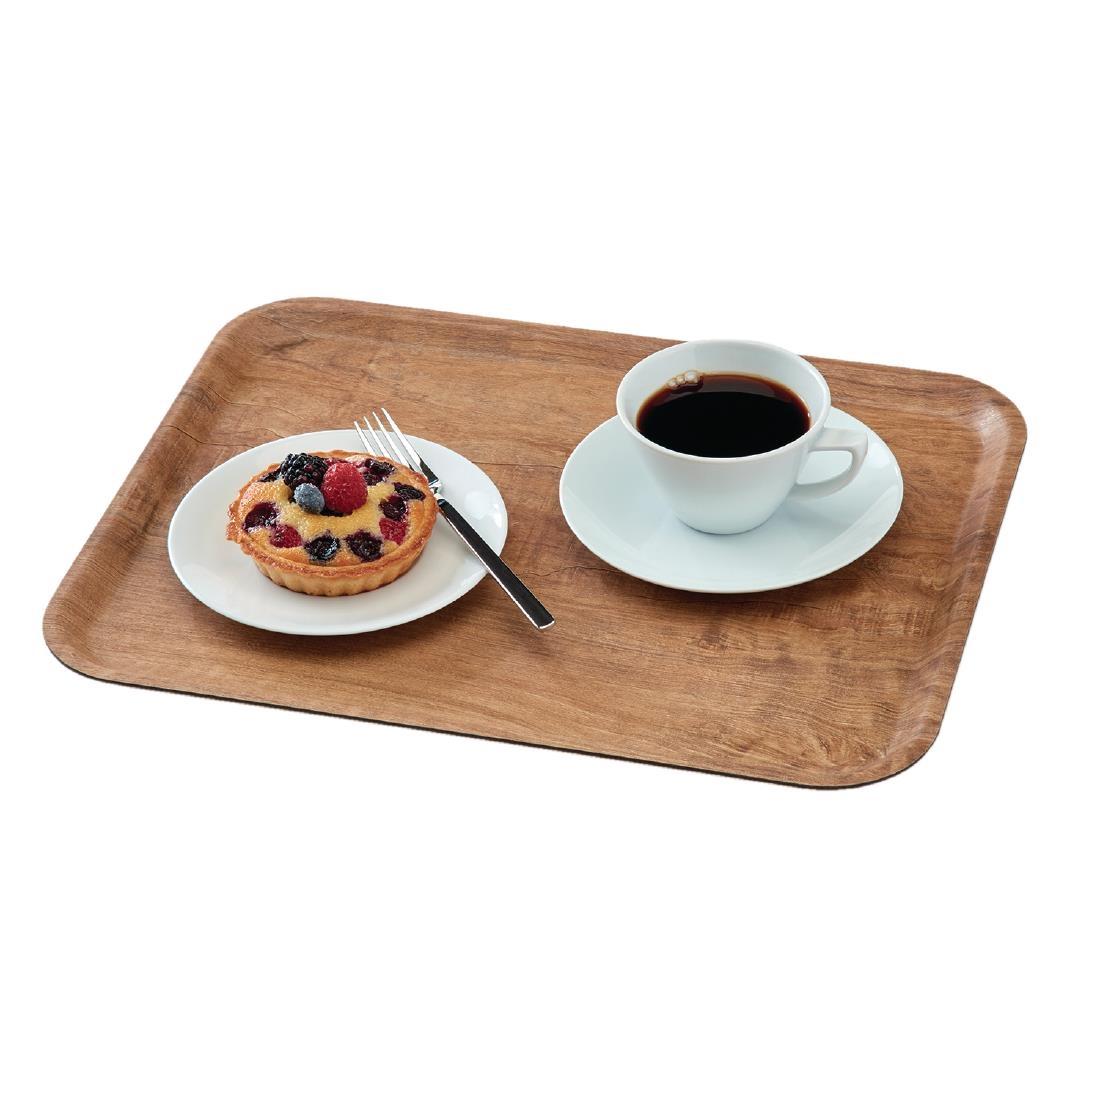 Cambro Madeira Laminate Canteen Tray Brown Olive 430mm - DR584  - 2